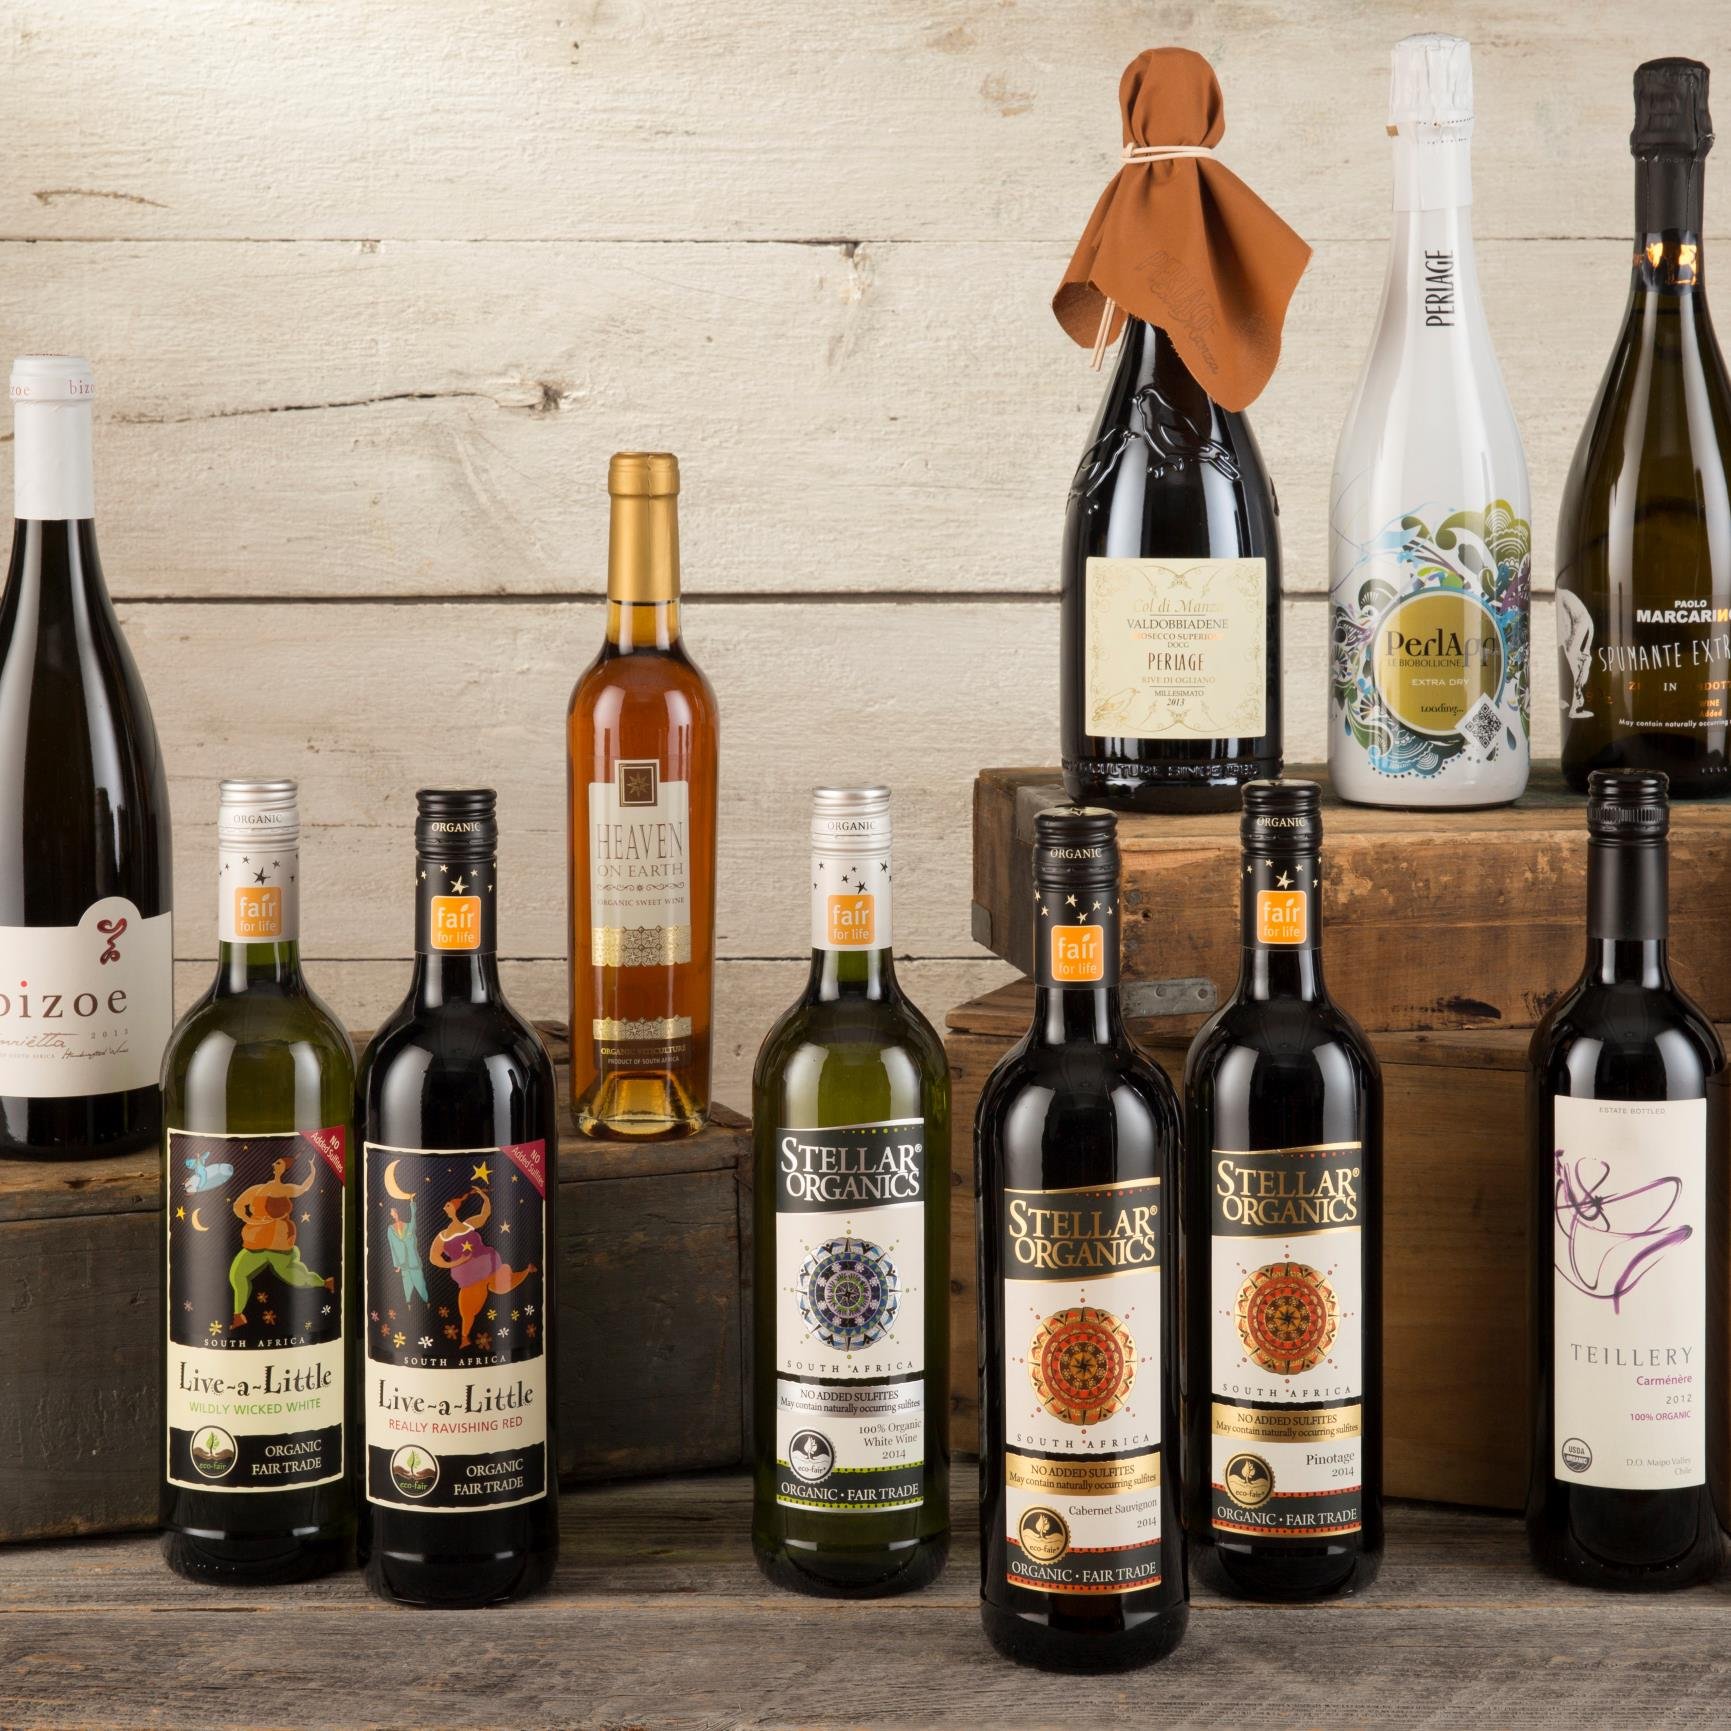 Importer and Distributor of the best 100% Organic wines we can find at the best possible prices, everyday. Distribution throughout the USA and Caribbean.